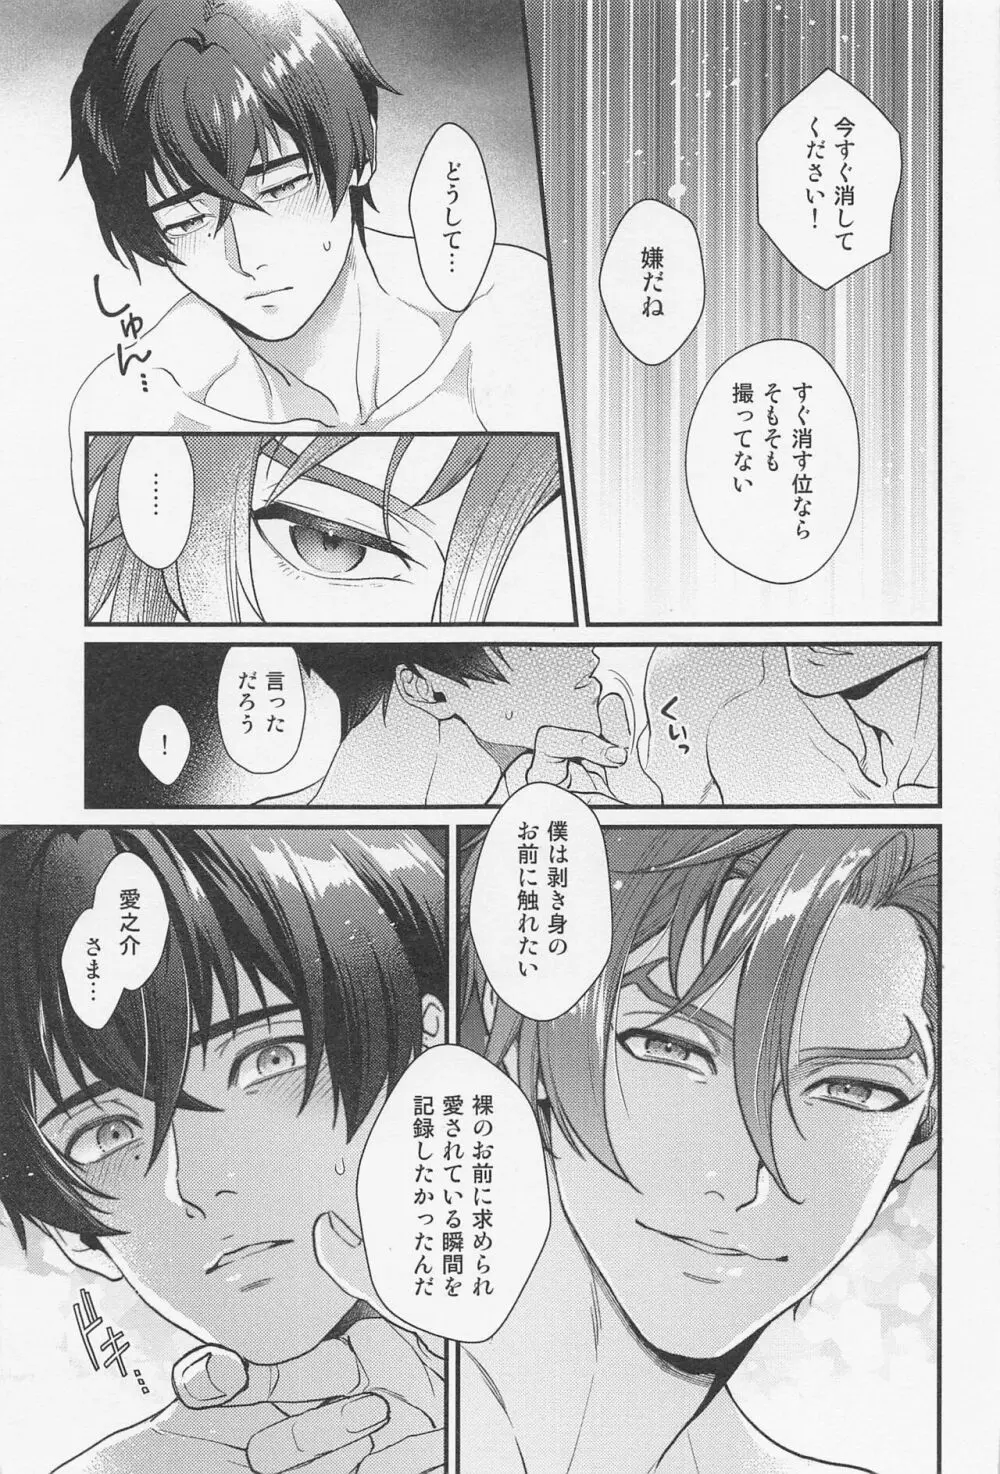 LOVE FIXED POINT - 愛の定点観測 - page26